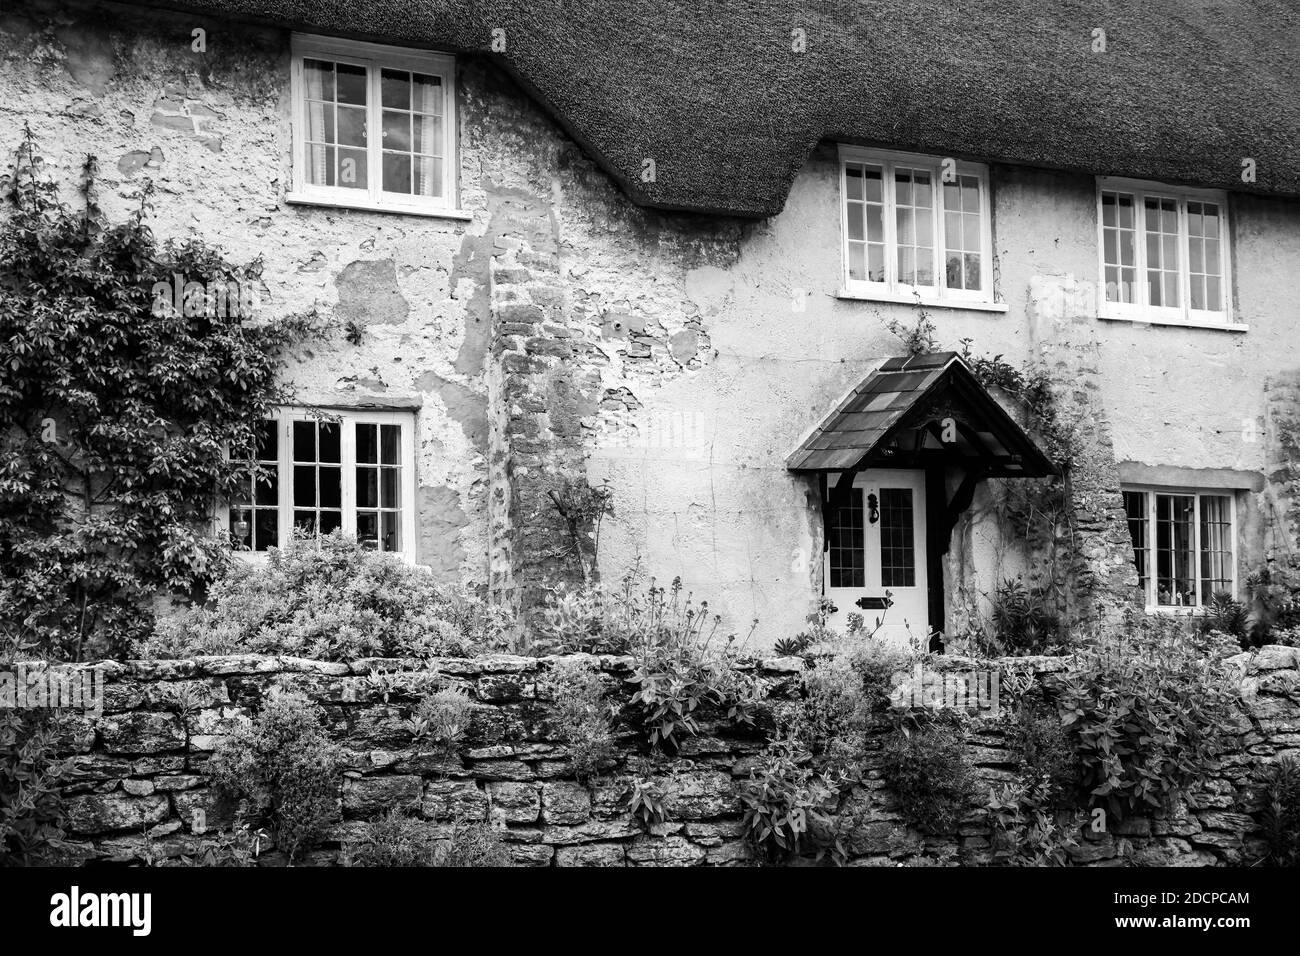 Close up of the Tellis Farm house, a thatched roof home of historical significance in the village of East Cocker, Somerset, England, in black and whit Stock Photo